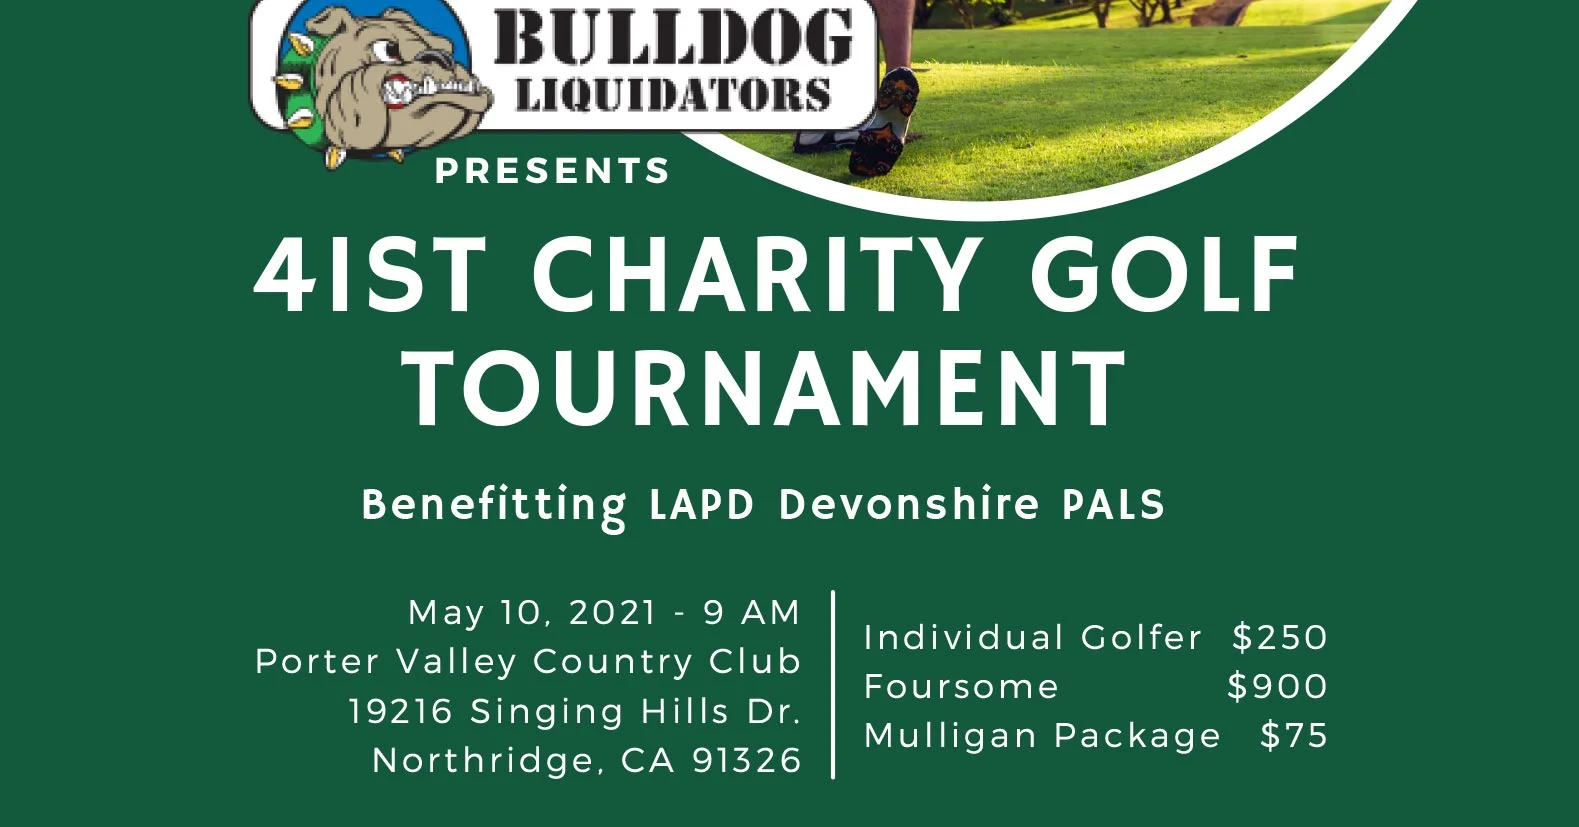 LAPD Devonshire PALS Annual Golf Tournament Monday, May 10, 2021 Porter Valley Country Club